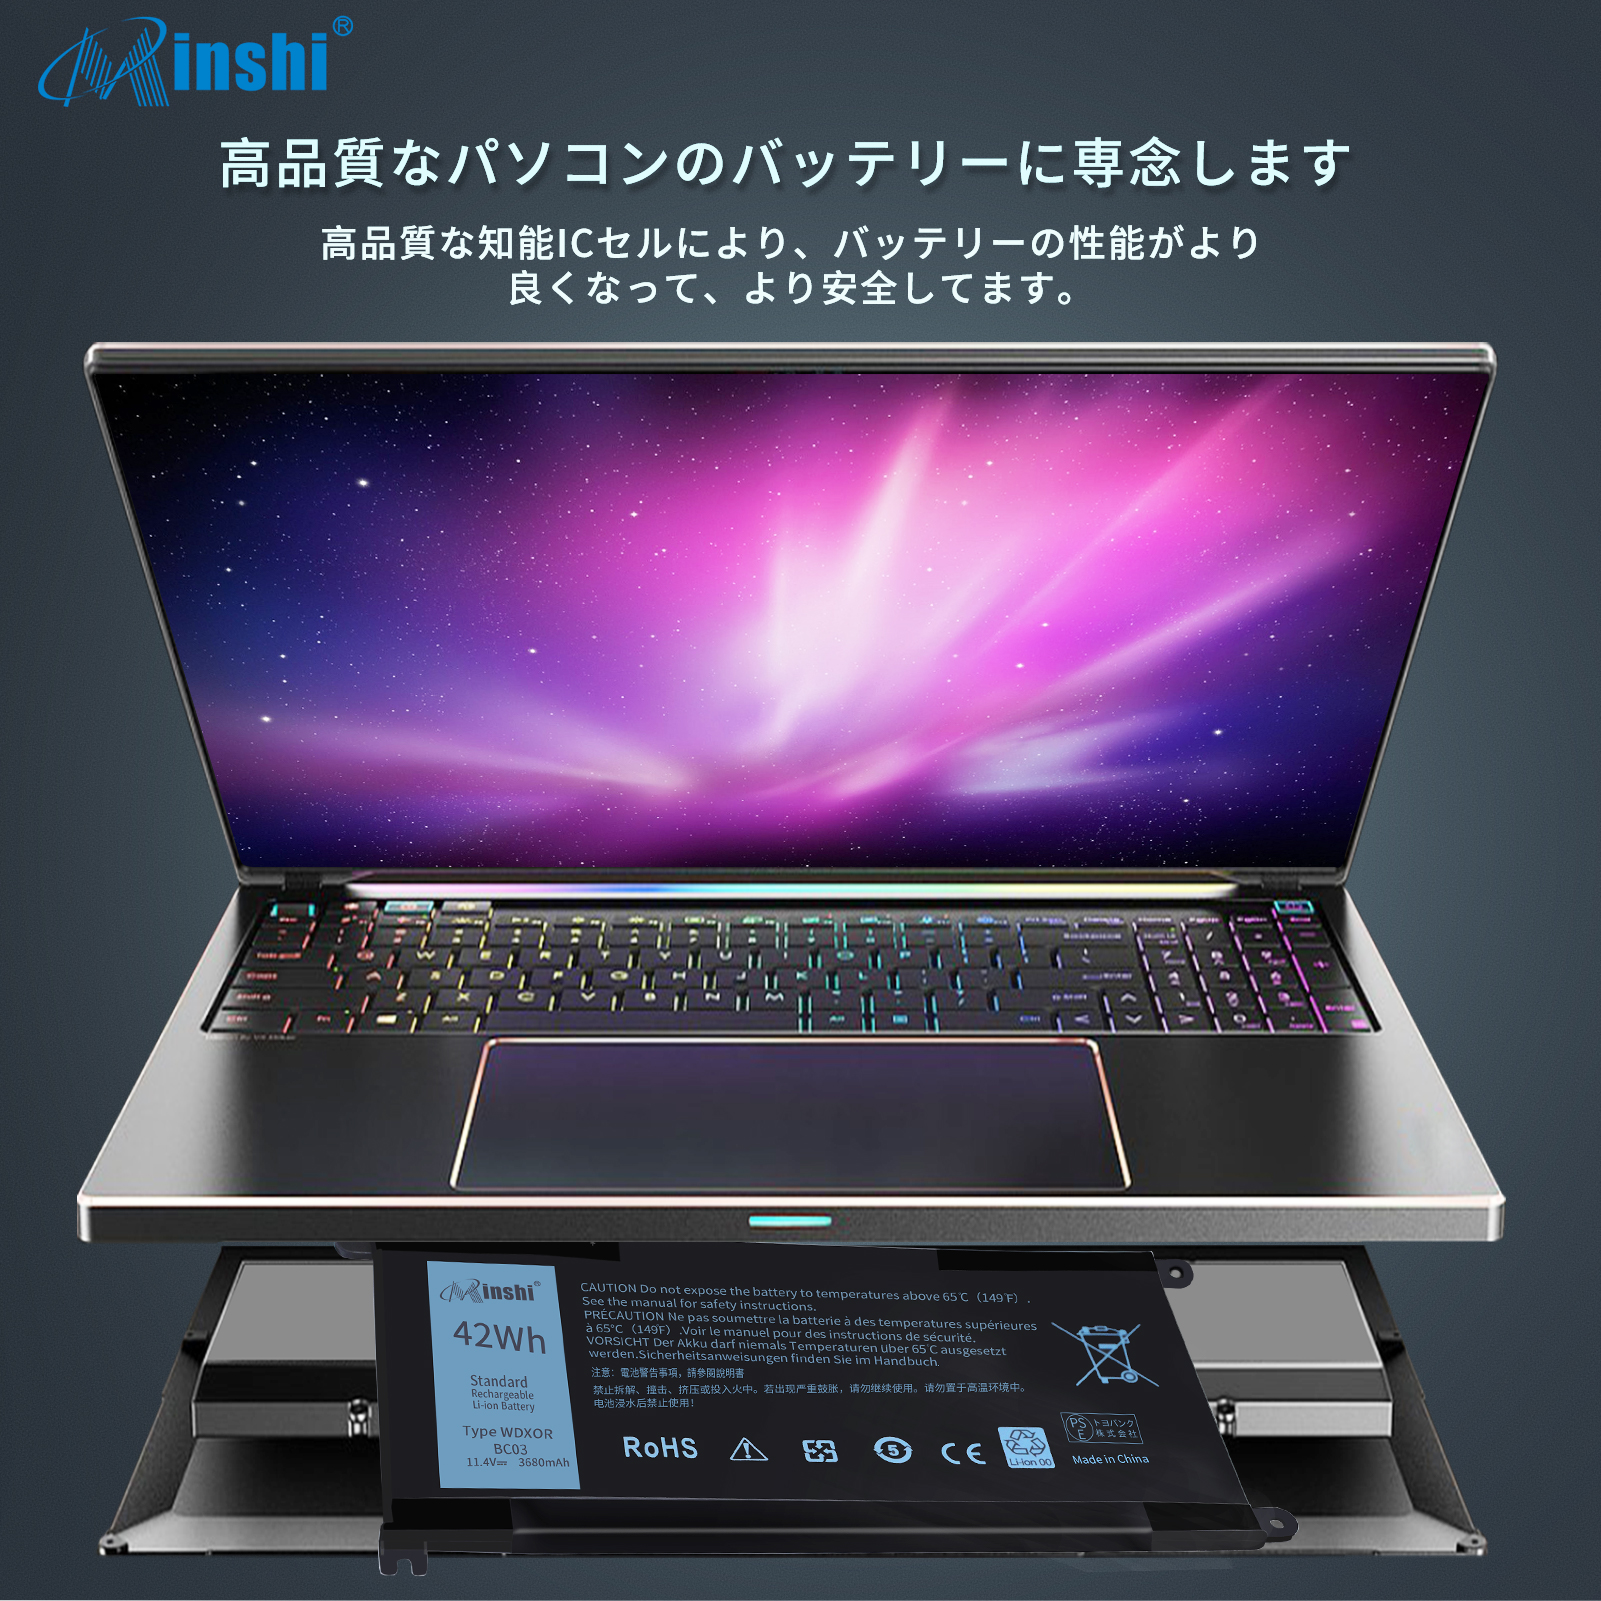 DELL 5570（ノートパソコンバッテリー）の商品一覧｜ノートパソコン